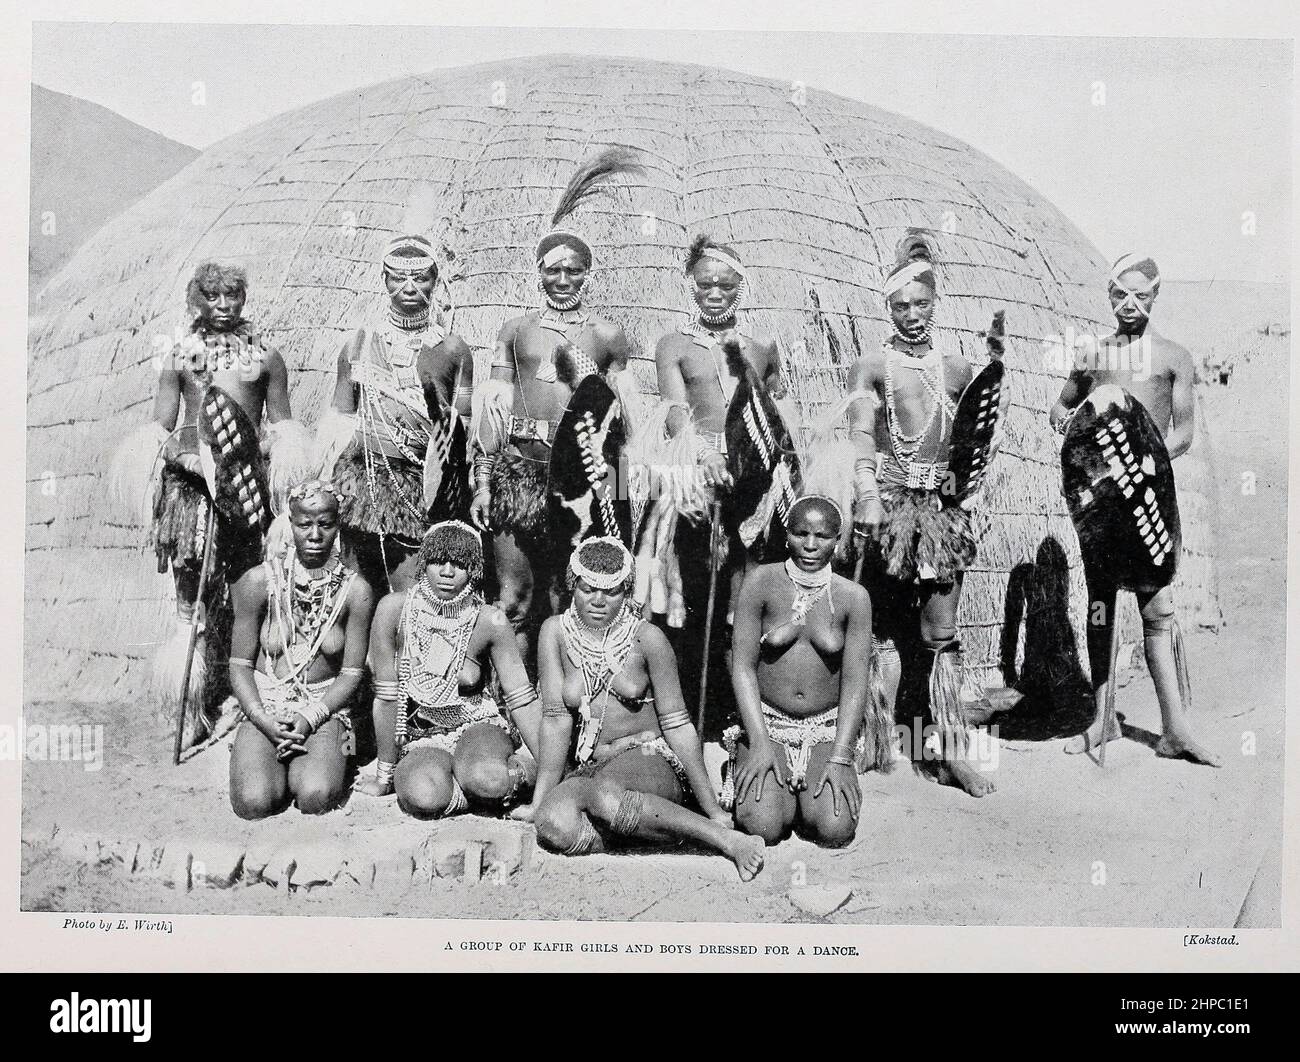 A Group of Kafir Boys and Girls dressed for a dance from the book ' The living races of mankind ' a popular illustrated account of the customs, habits, pursuits, feasts & ceremonies of the races of mankind throughout the world by Sir Harry Hamilton Johnston, and Henry Neville Hutchinson Published in London by Hutchinson & Co. in 1902 Stock Photo